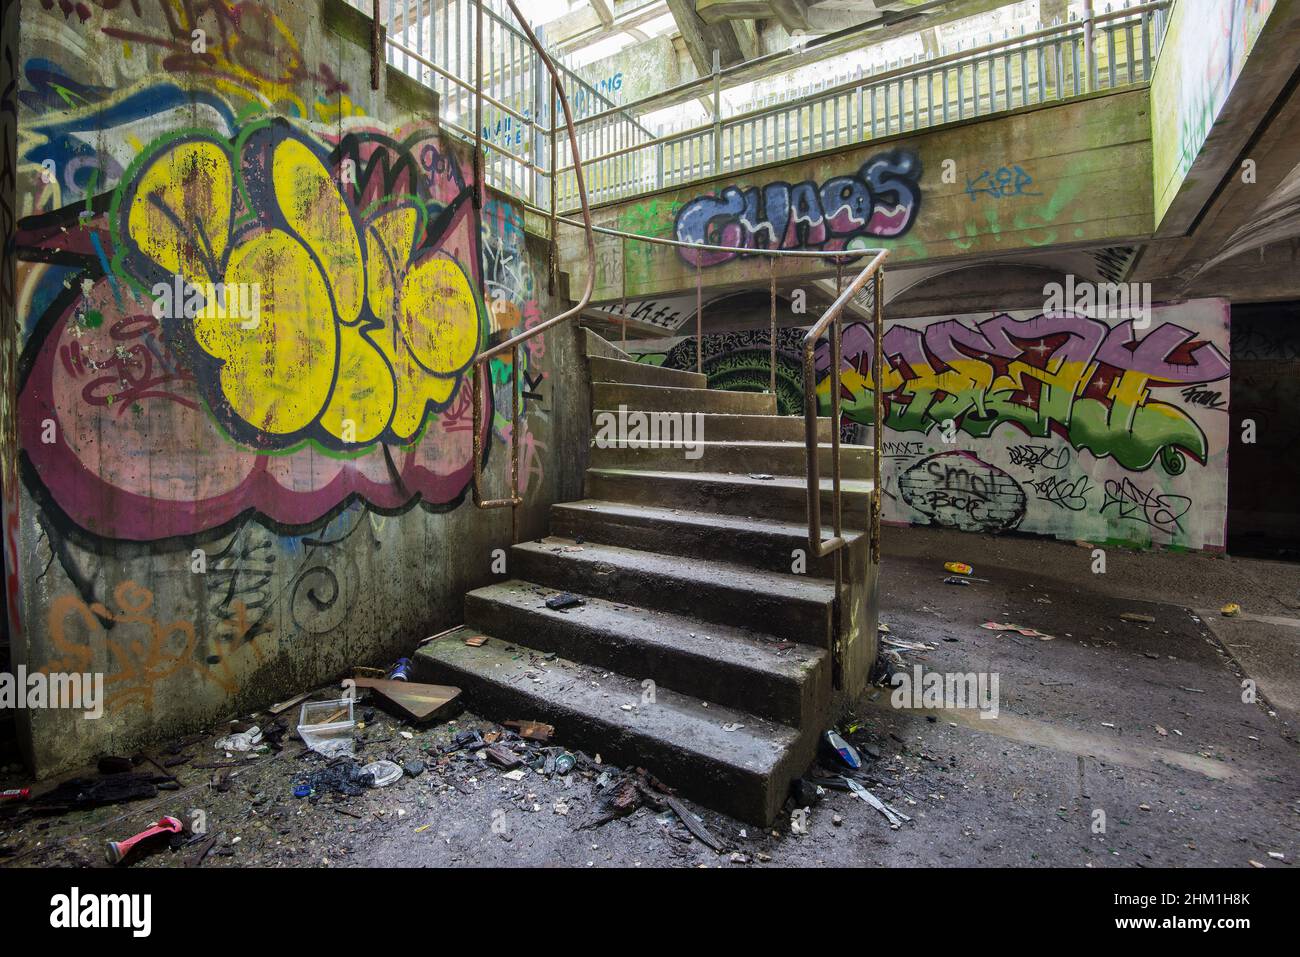 Derelict A listed brutalist style building and former priest's training centre, St Peter's Seminary in Cardross, Argyll and Bute, Scotland Stock Photo